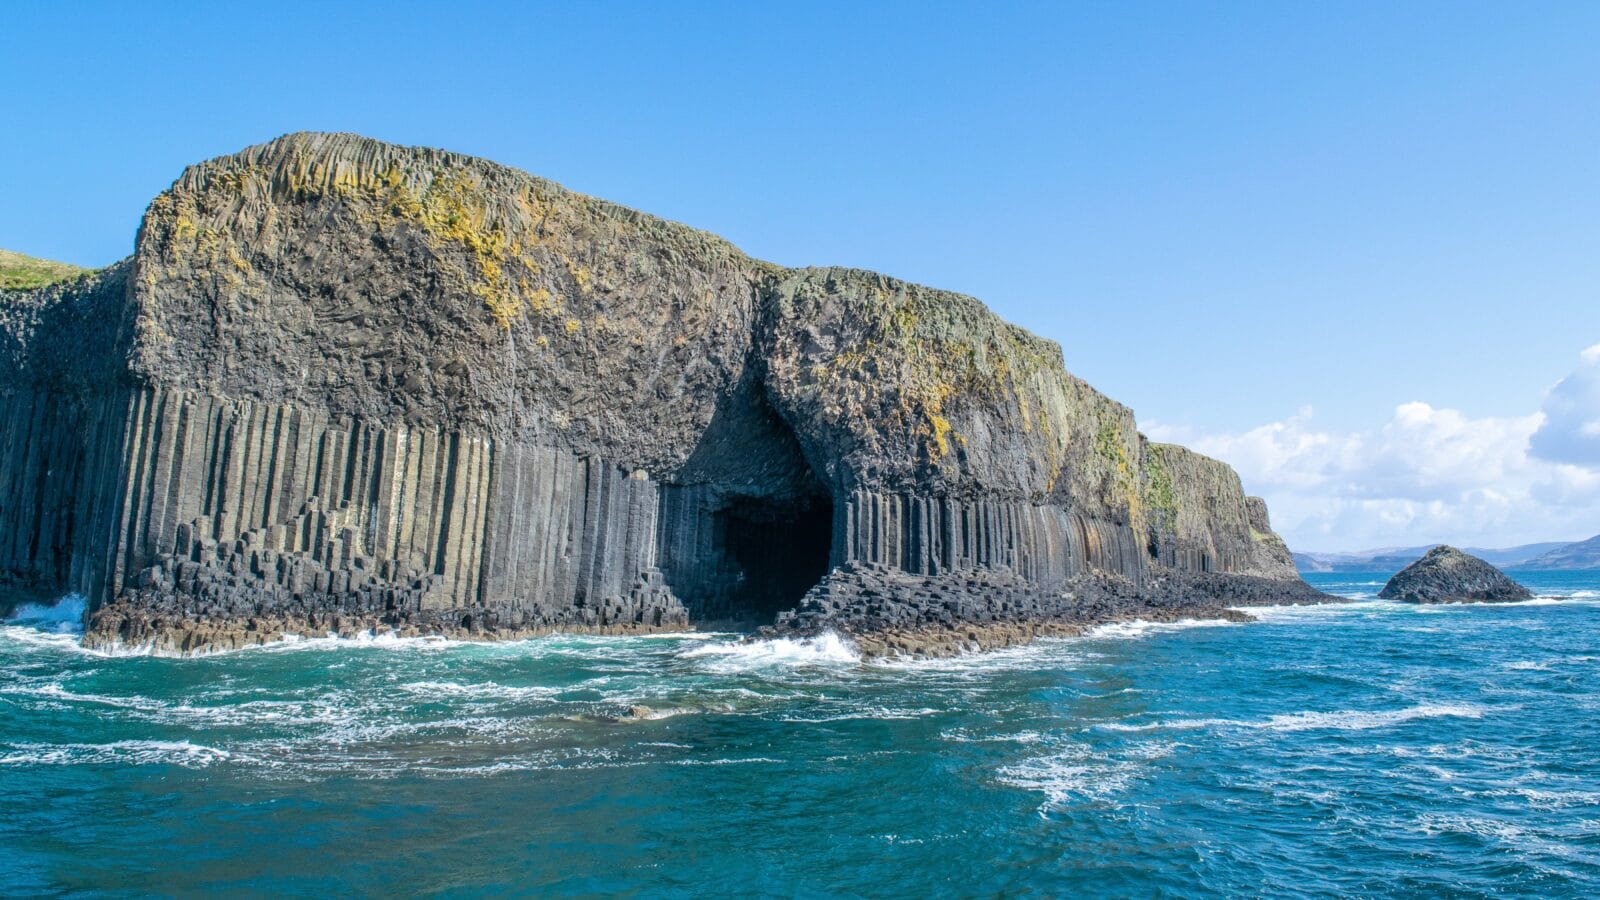 <p>Located on the uninhabited Scottish island of Staffa, Singal’s cave is part of a national nature reserve known for its natural acoustics. The spectacular sea cave has been a part of Scotland’s culture, art, and folklore since its discovery in 1772.</p><p>Besides its acoustics, Fingal’s Cave earns a place on this list thanks to its hexagonal basalt pillars caused by volcanic activity. After entering the cavern through its splendid, movie-like entrance, visitors are met by a majestic chamber fit for a royal dinner.</p>